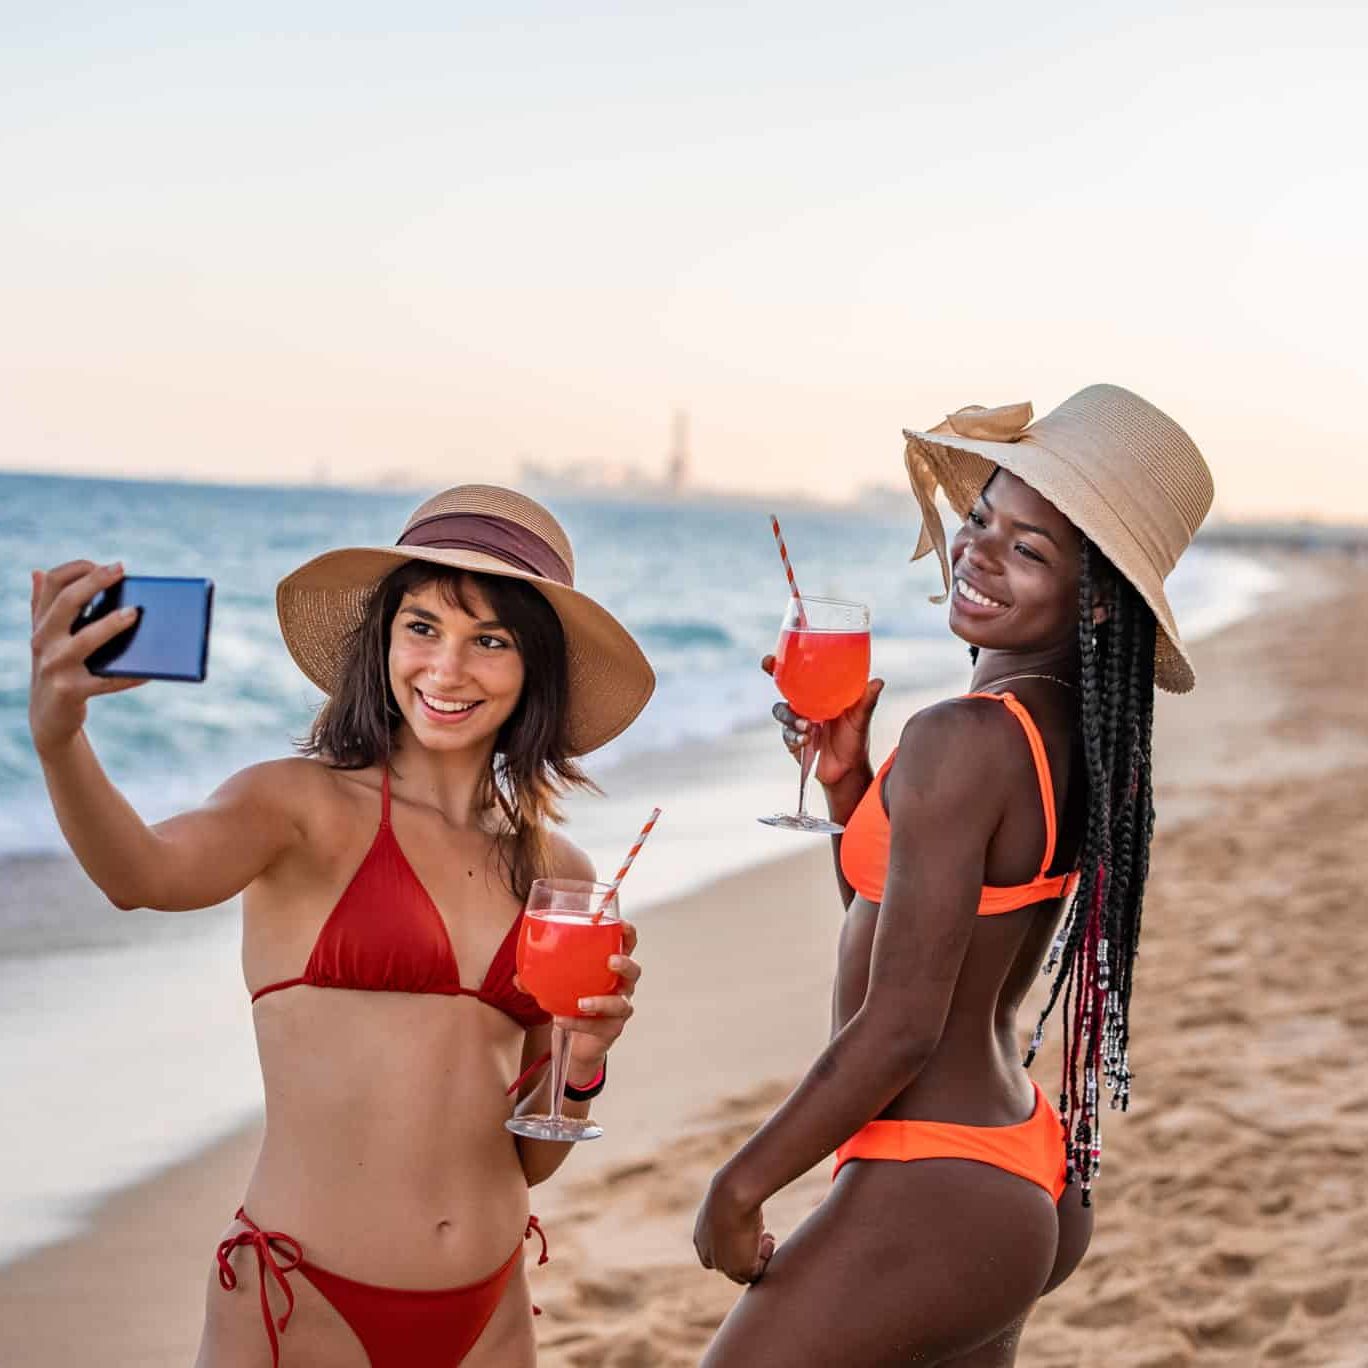 Charming young fit diverse women in swimwear and hats with drinks taking selfie on mobile phone while spending summer evening together on sandy beach near ocean